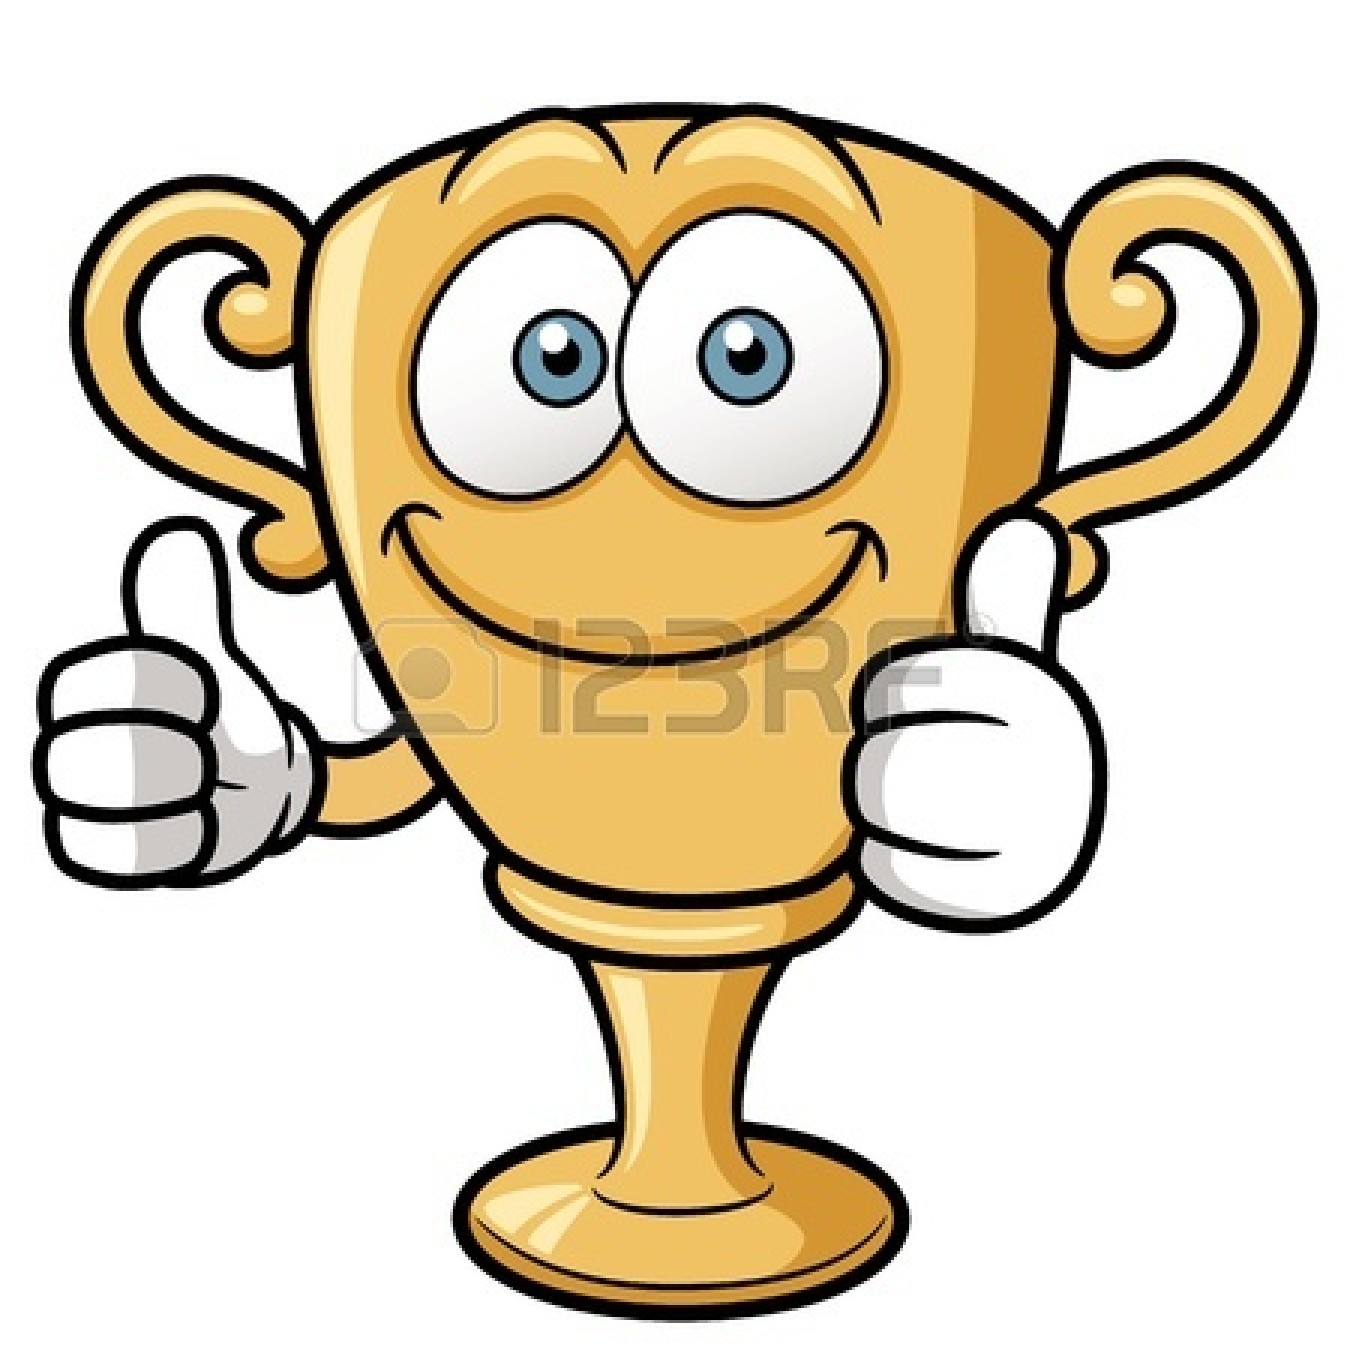 Basketball Championship Trophy   Clipart Panda   Free Clipart Images